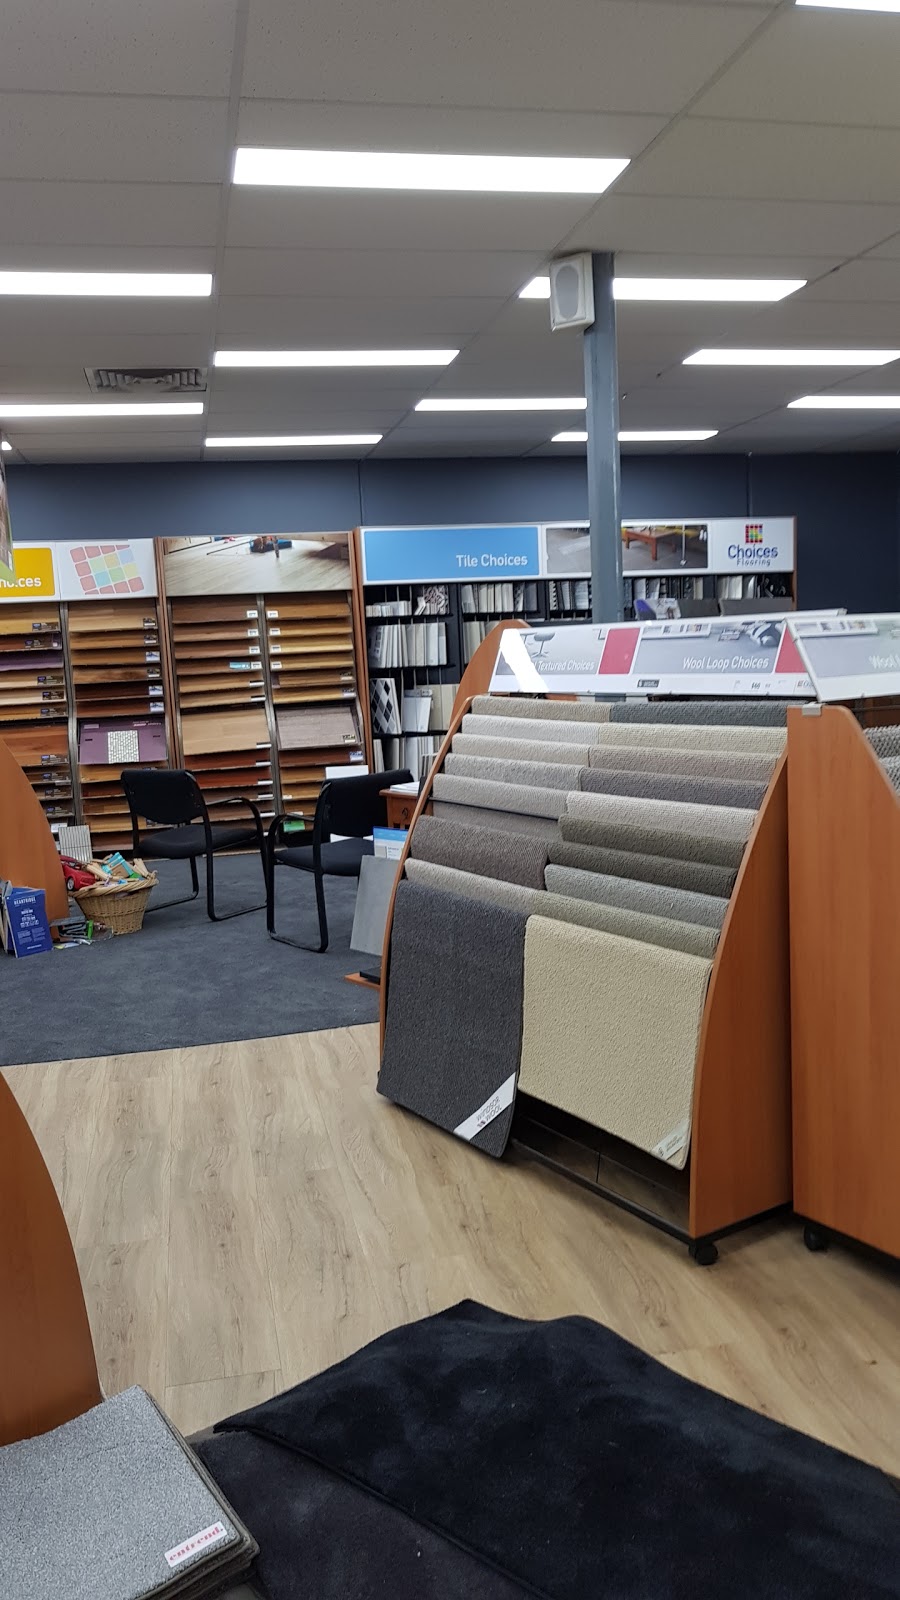 Choices Flooring | home goods store | 1/59-63 Captain Cook Dr, Caringbah NSW 2229, Australia | 0295243755 OR +61 2 9524 3755